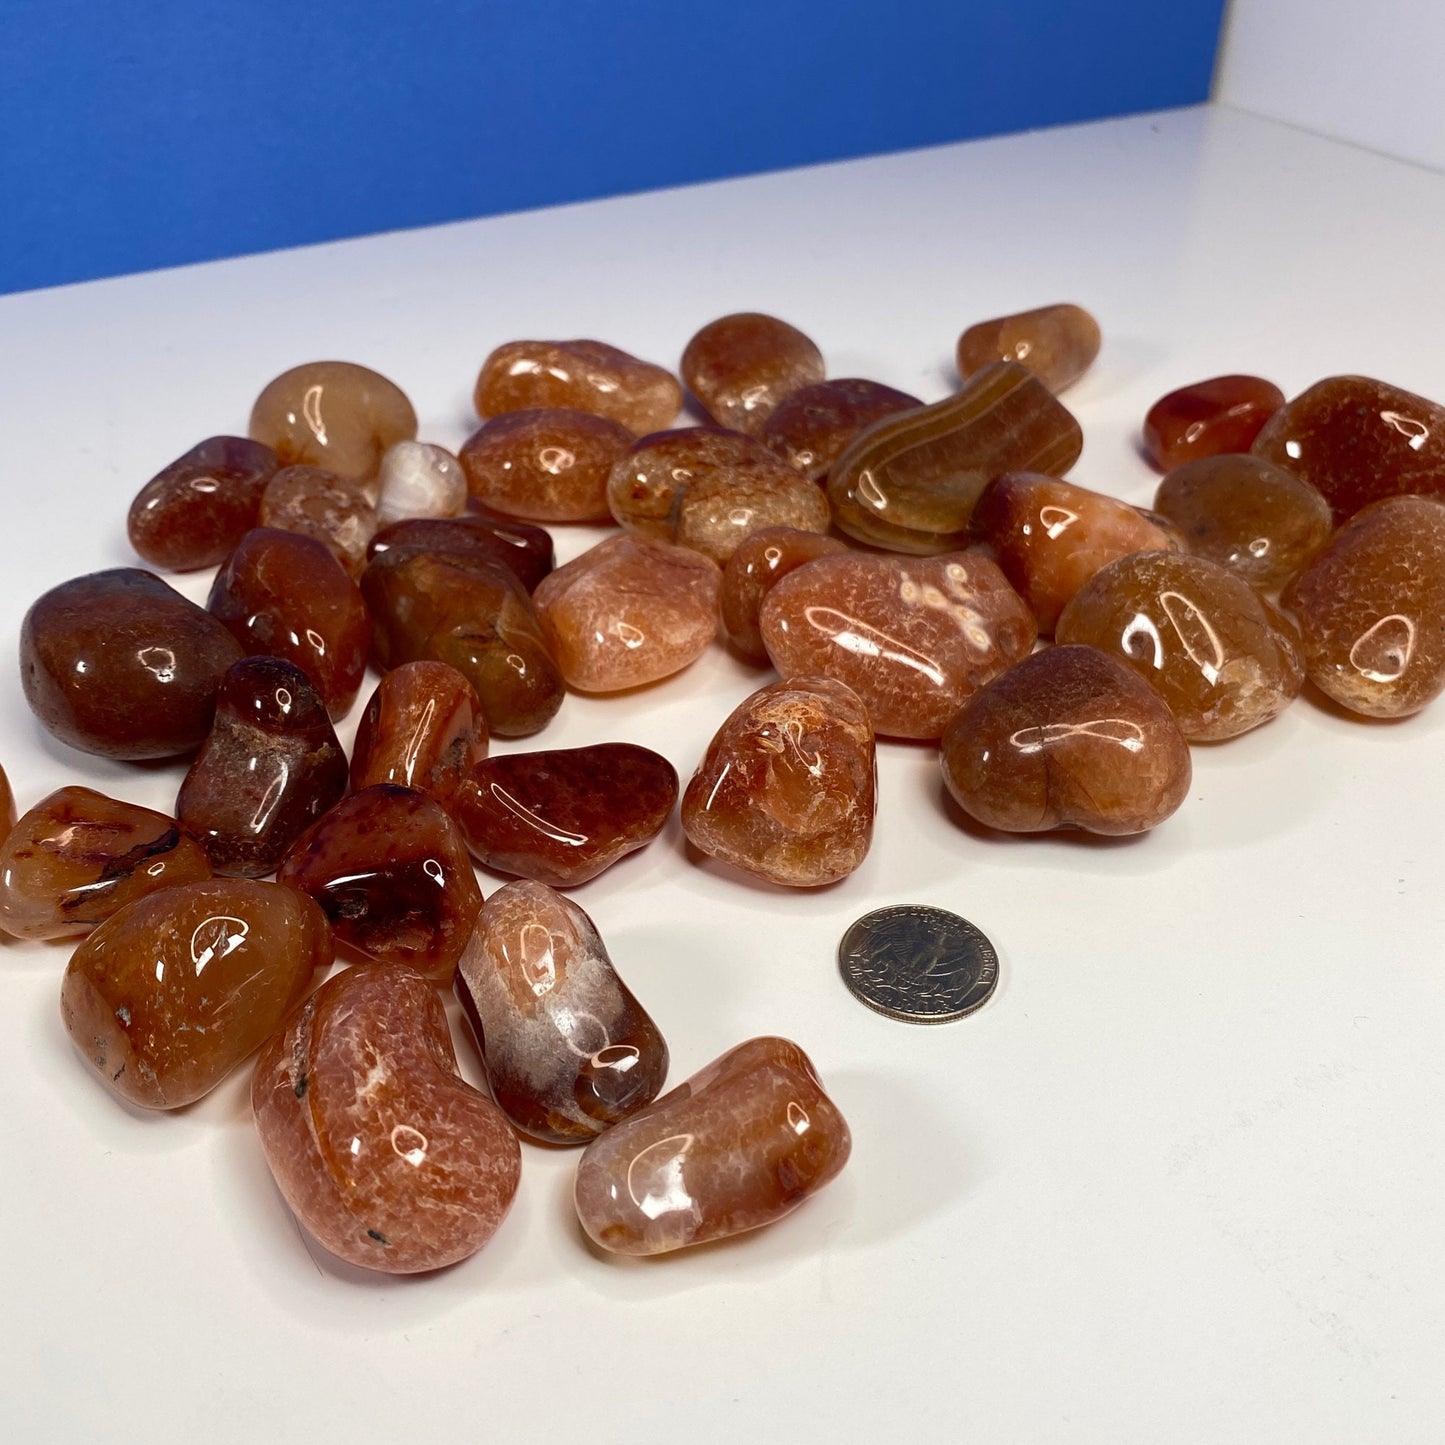 Natural Carnelian Crystal - Orange & Red Tumbled Stone - for Confidence and Motivation - genuine healing stones for root and sacral chakra